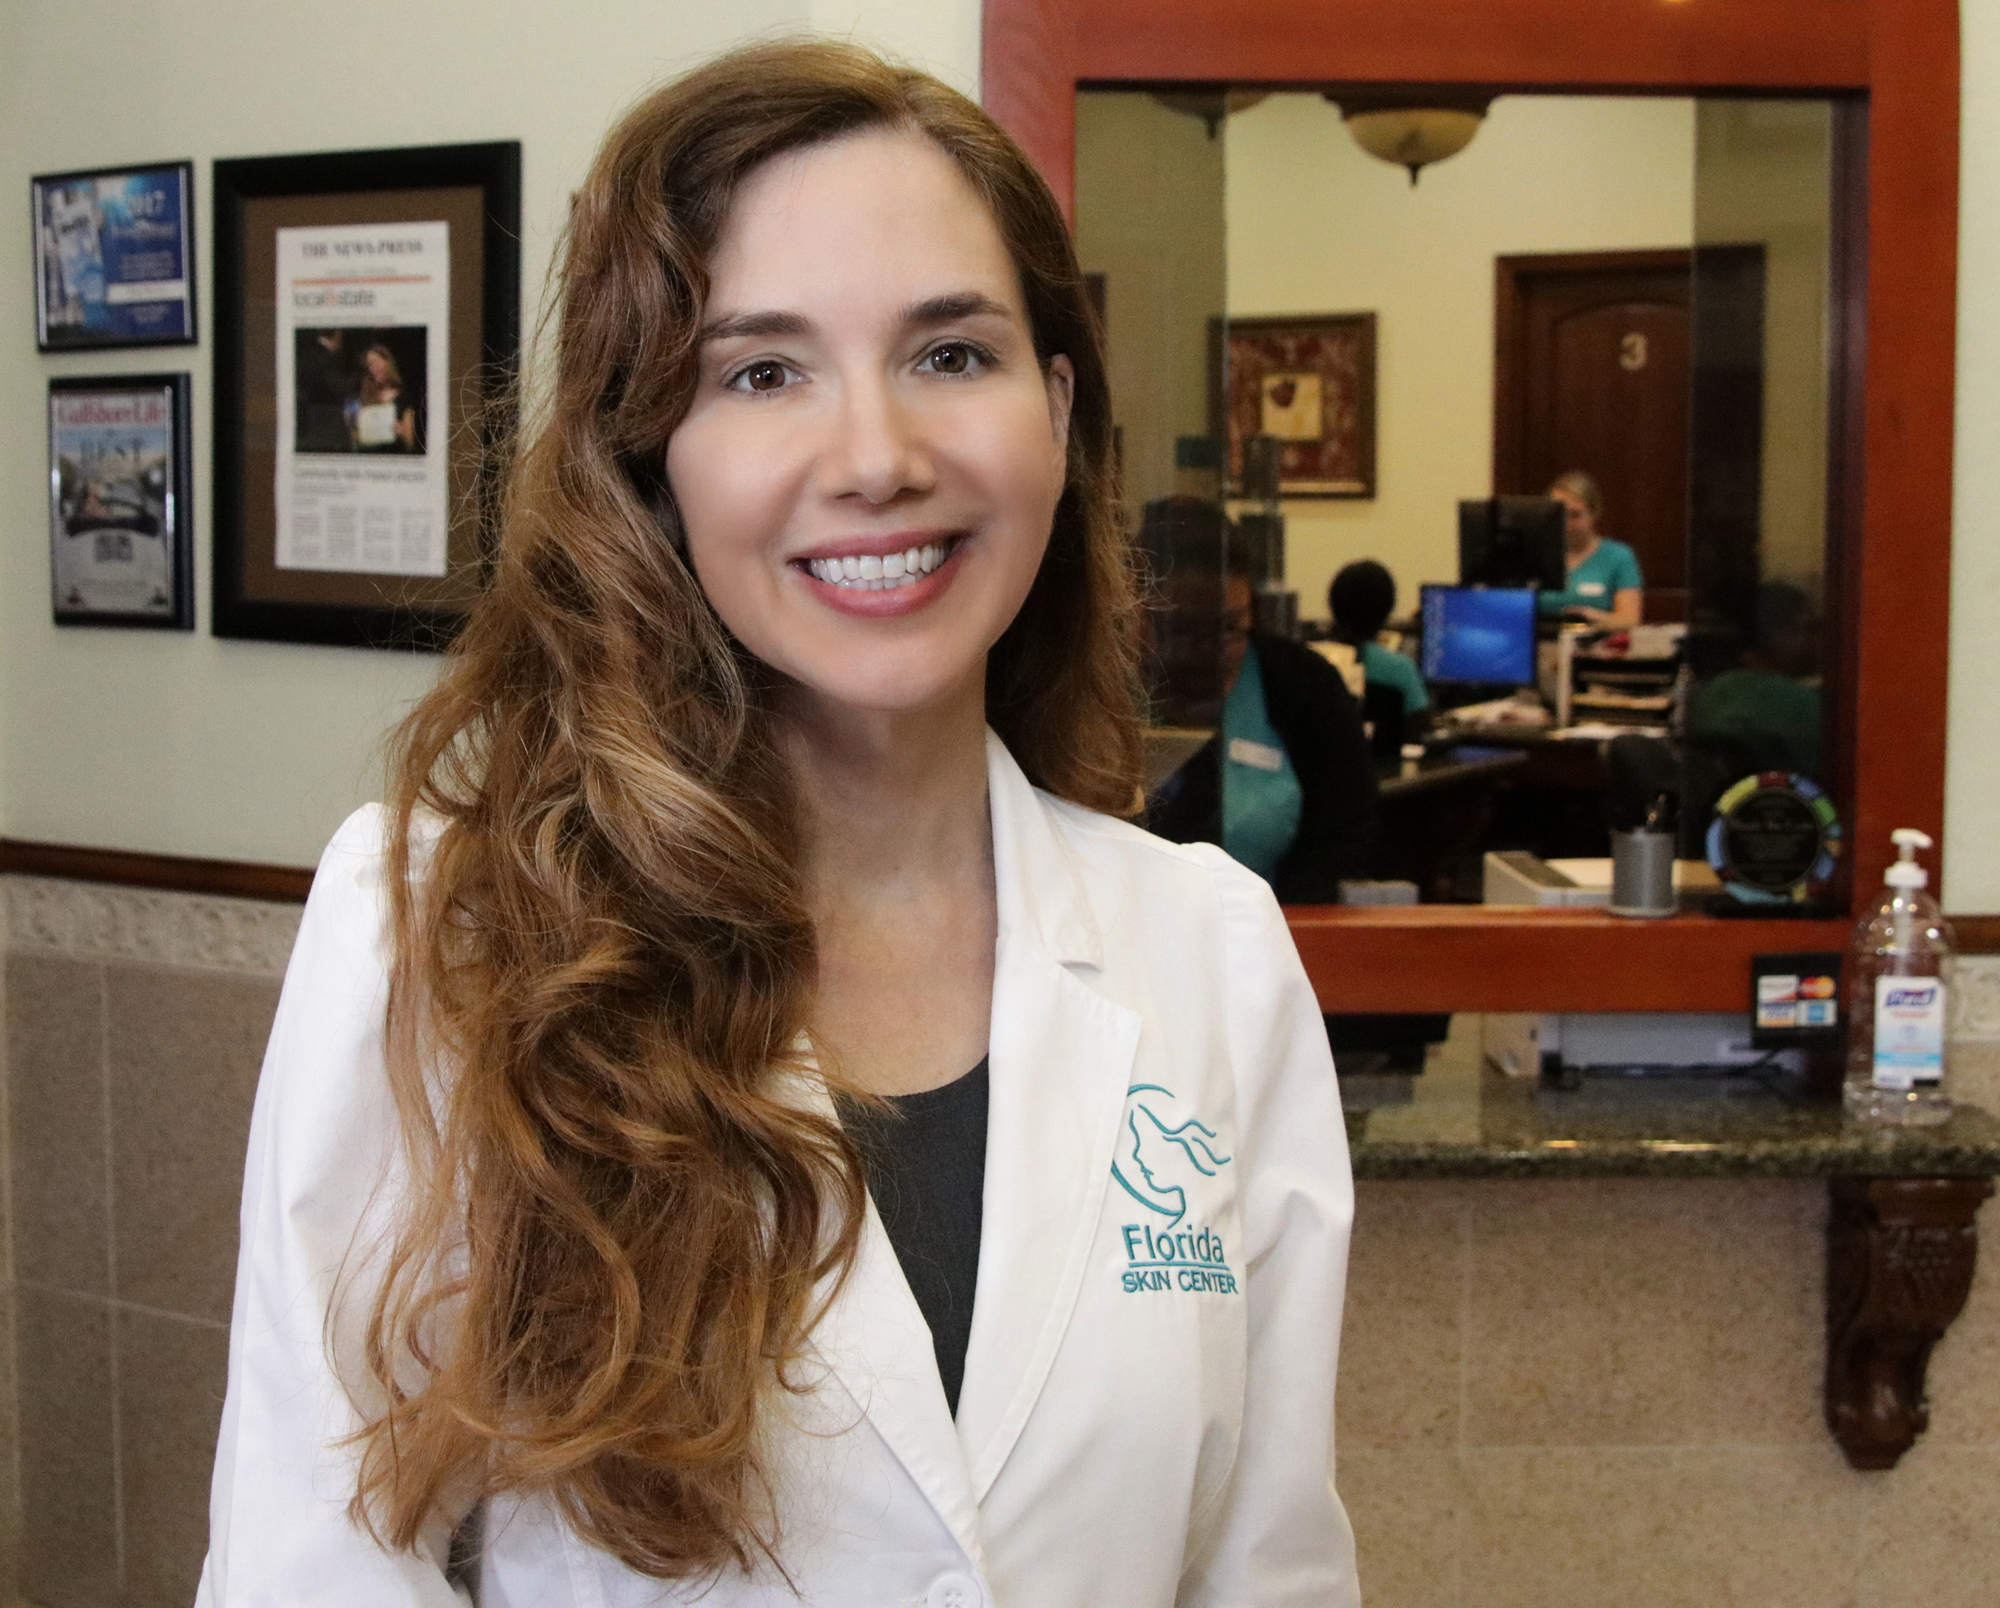 Dr. Anais Badia first contracted George Gulisano as a consultant. He quickly became the Florida Skin Center CEO.